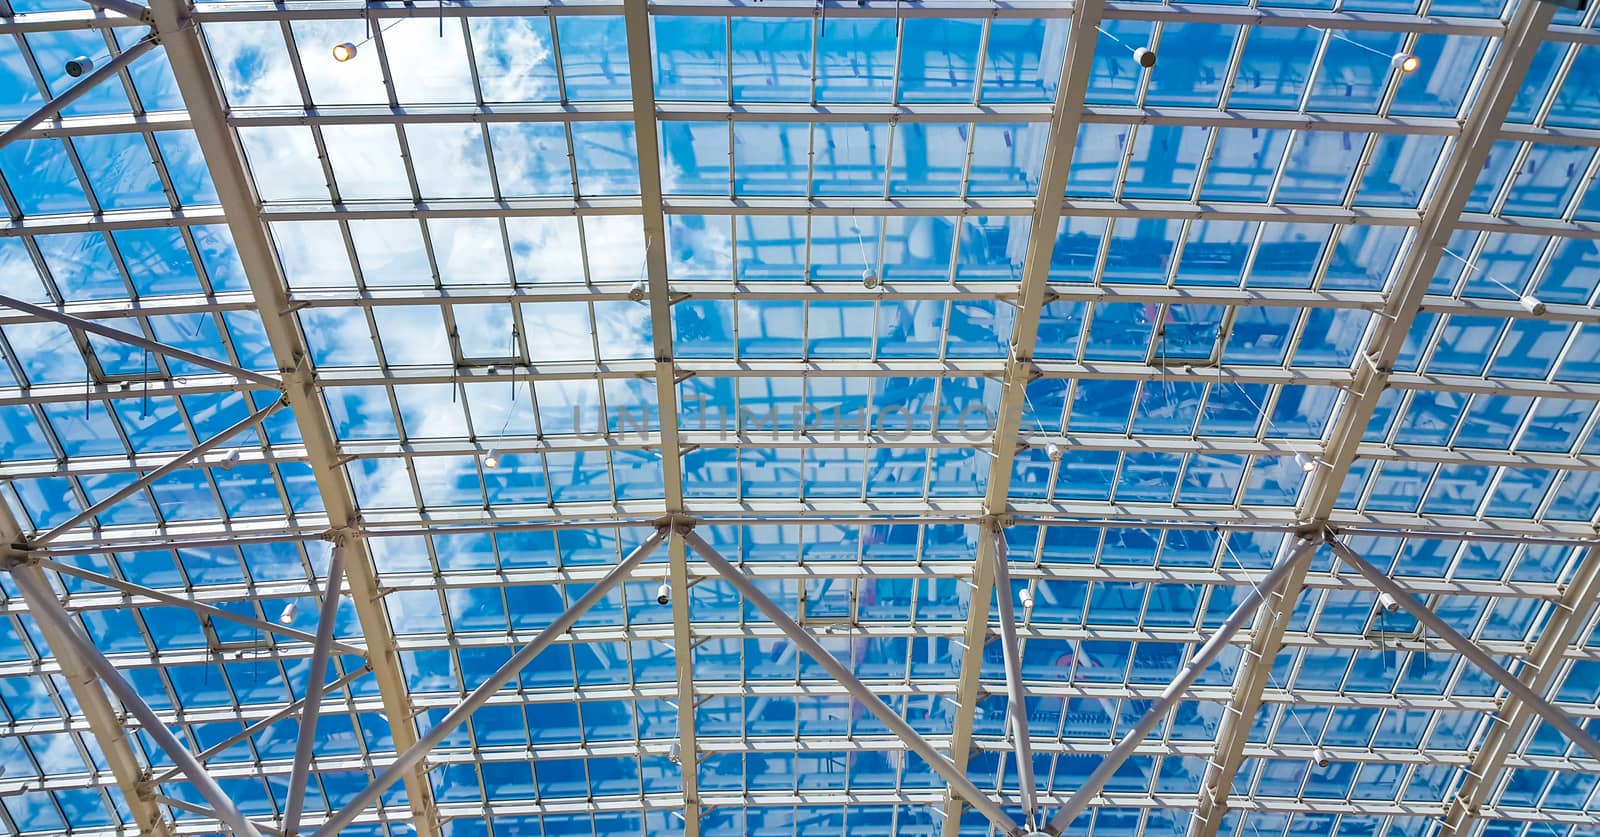 Skylight window - abstract architectural background by zeffss